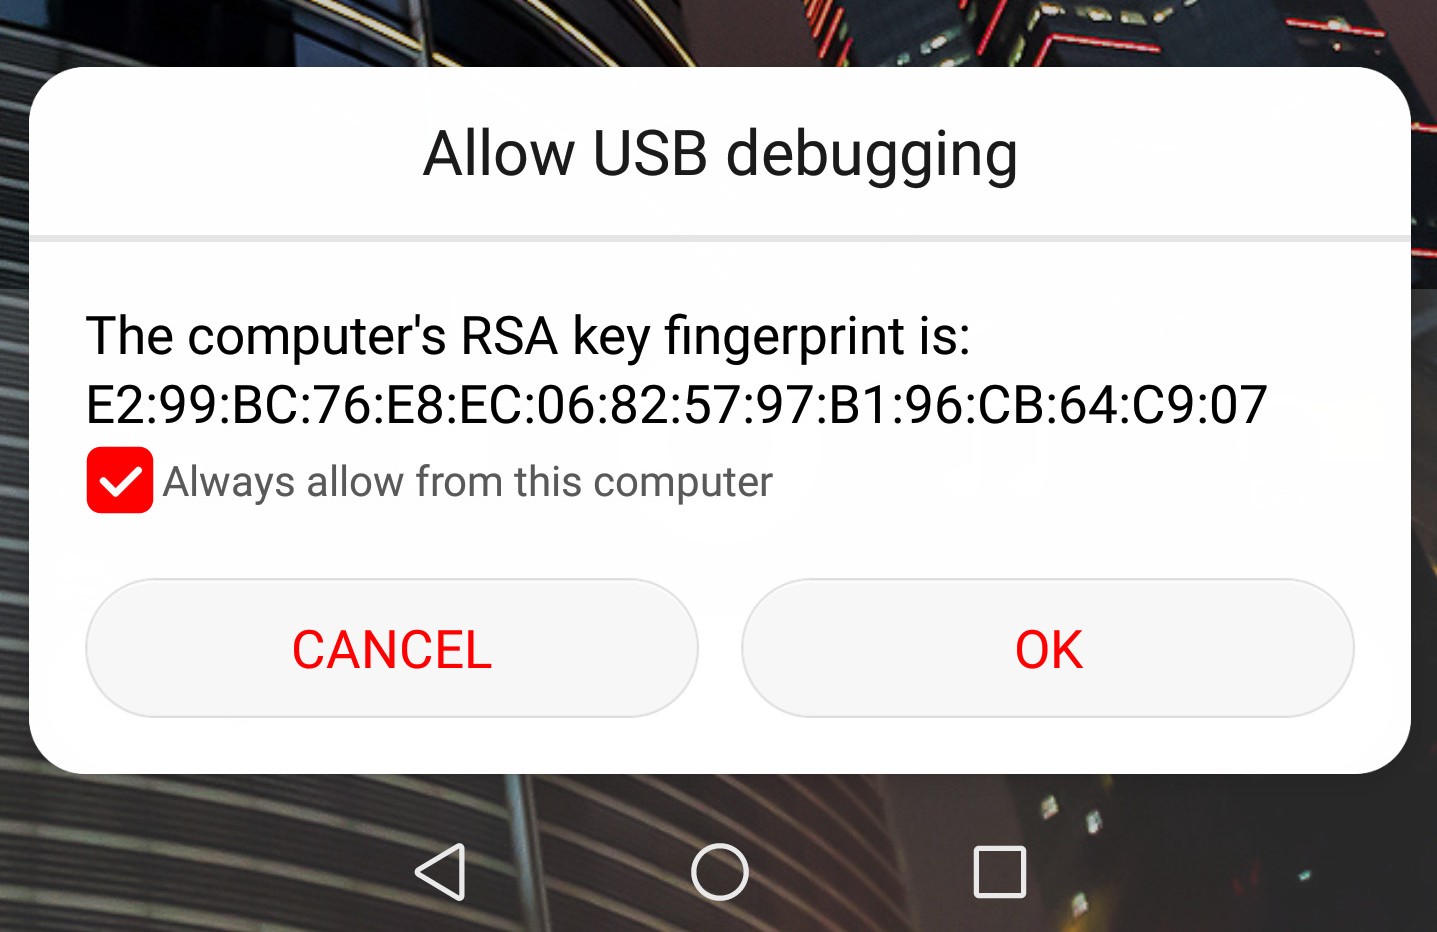 Disable Heads Up Notifications On Android Without Root